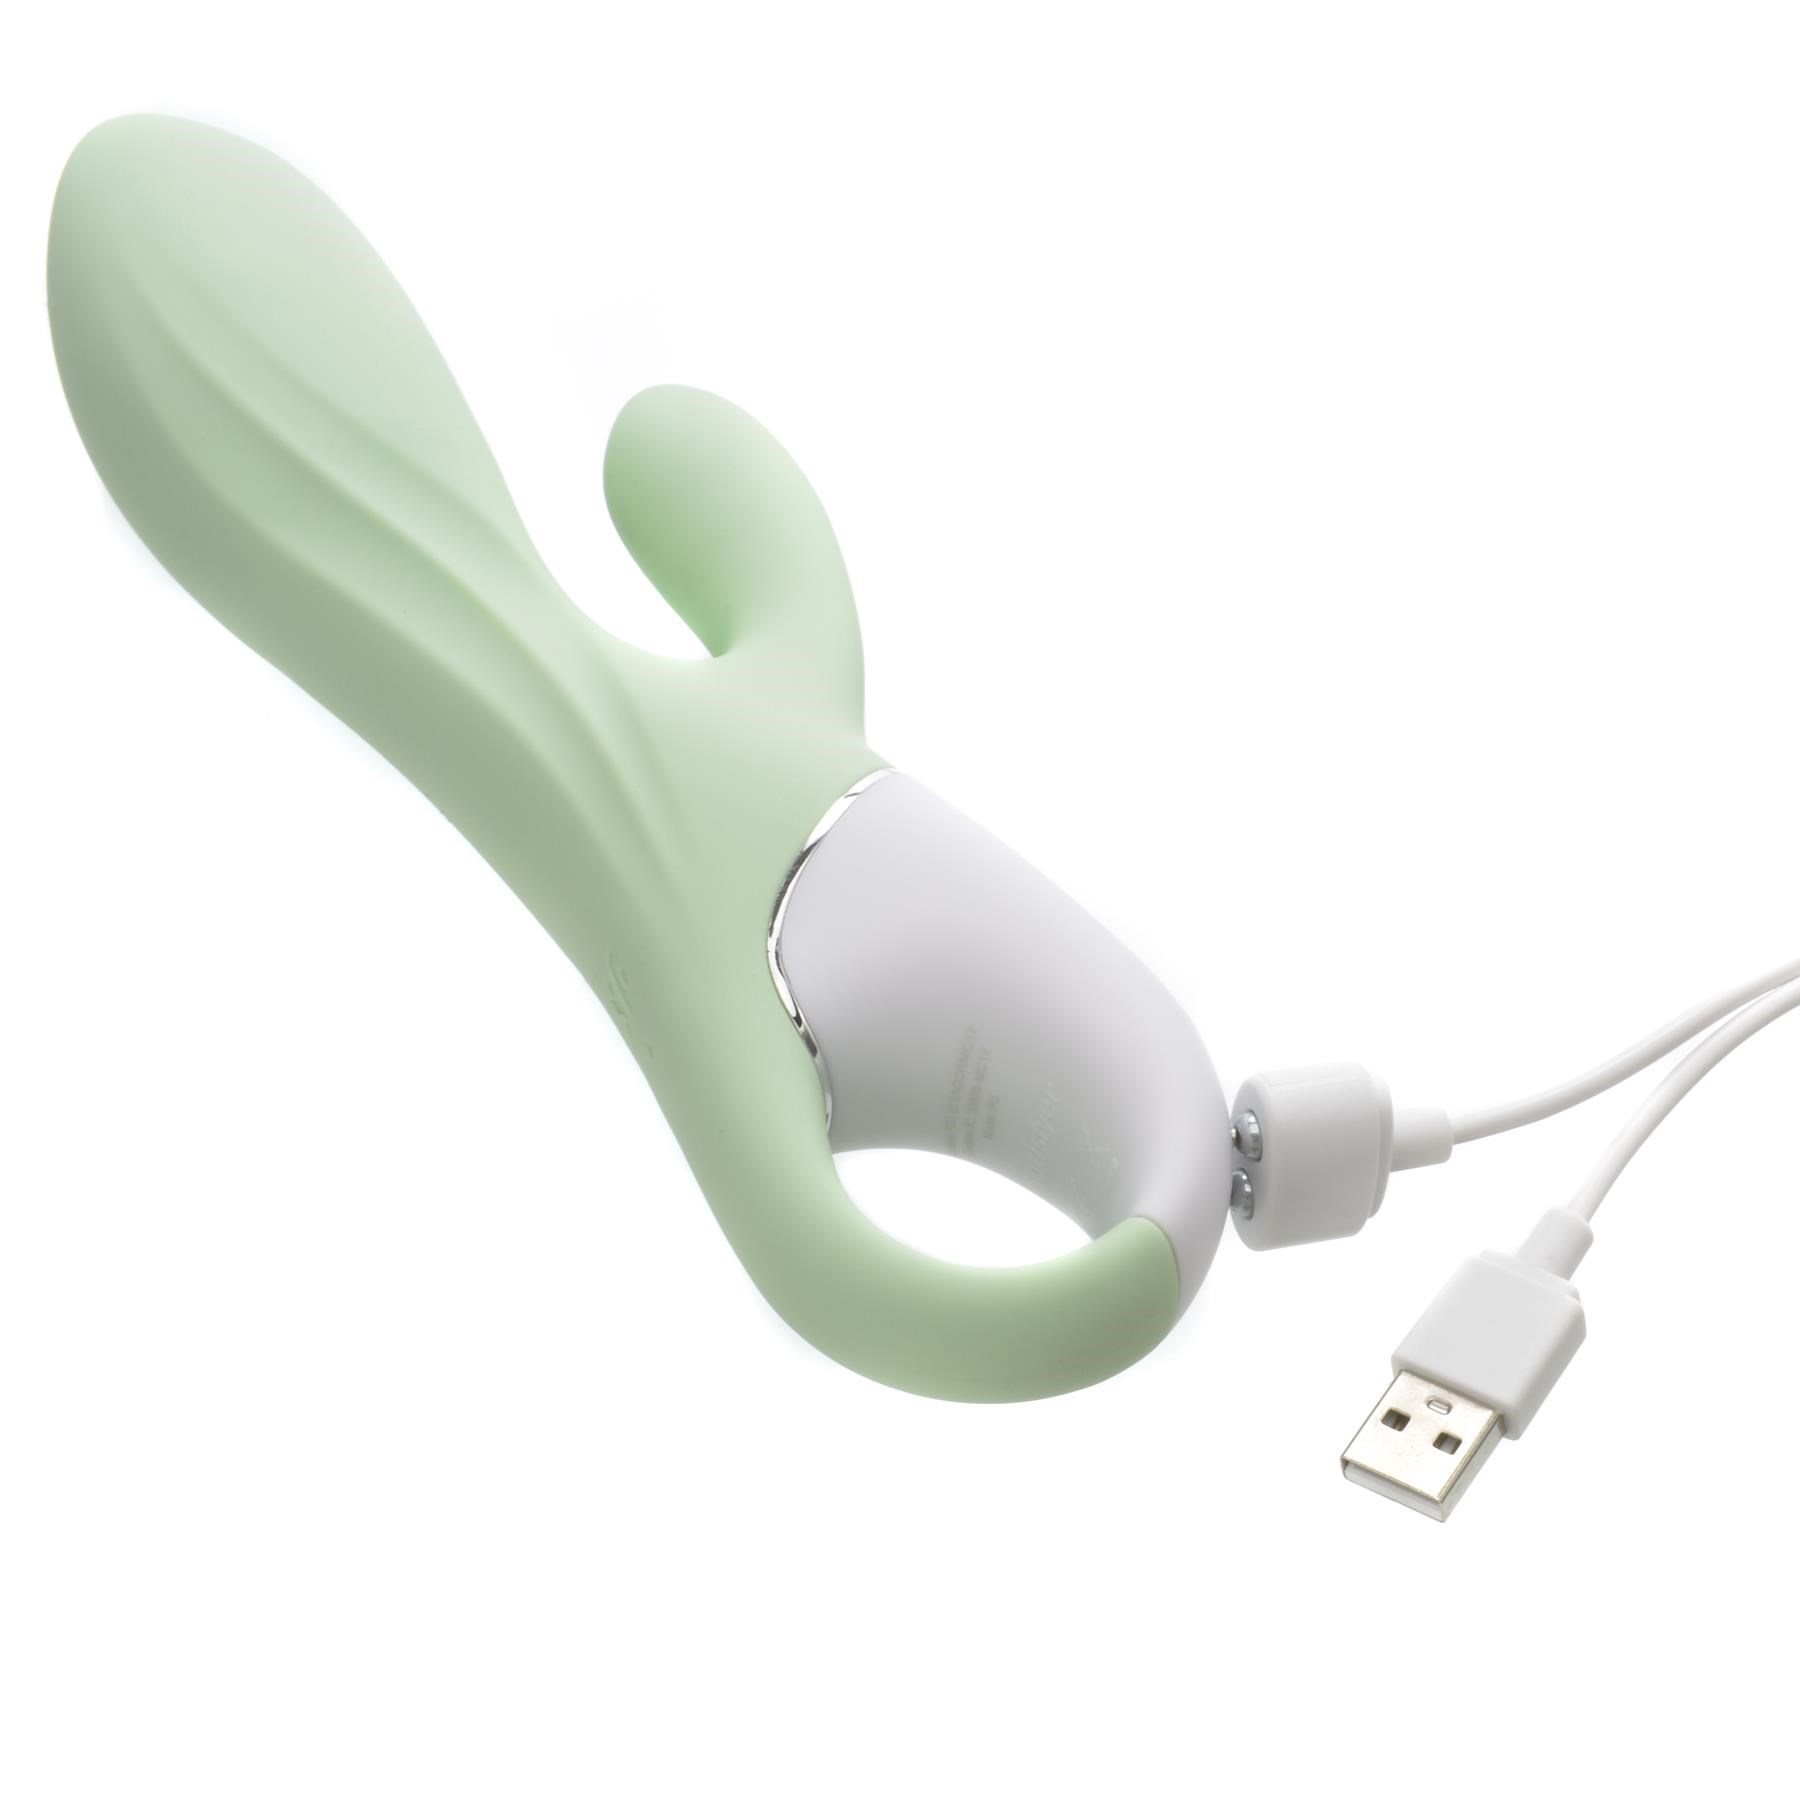 Satisfyer Air Pump Inflatable Bunny - Showing Where Charging Cable is Placed